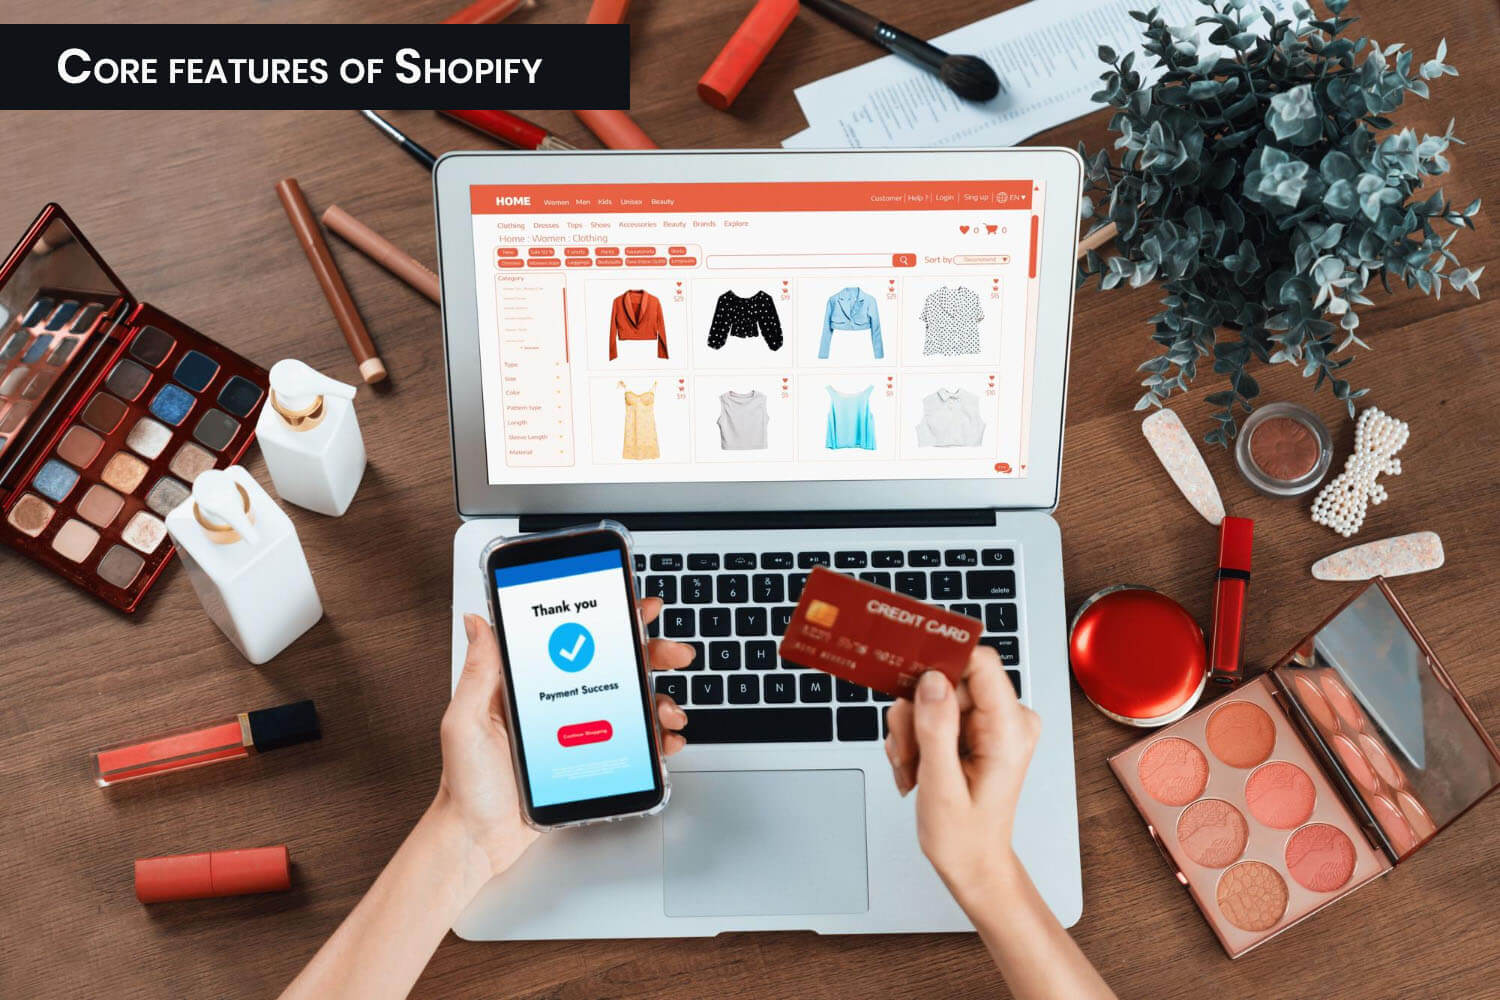 Core features of Shopify